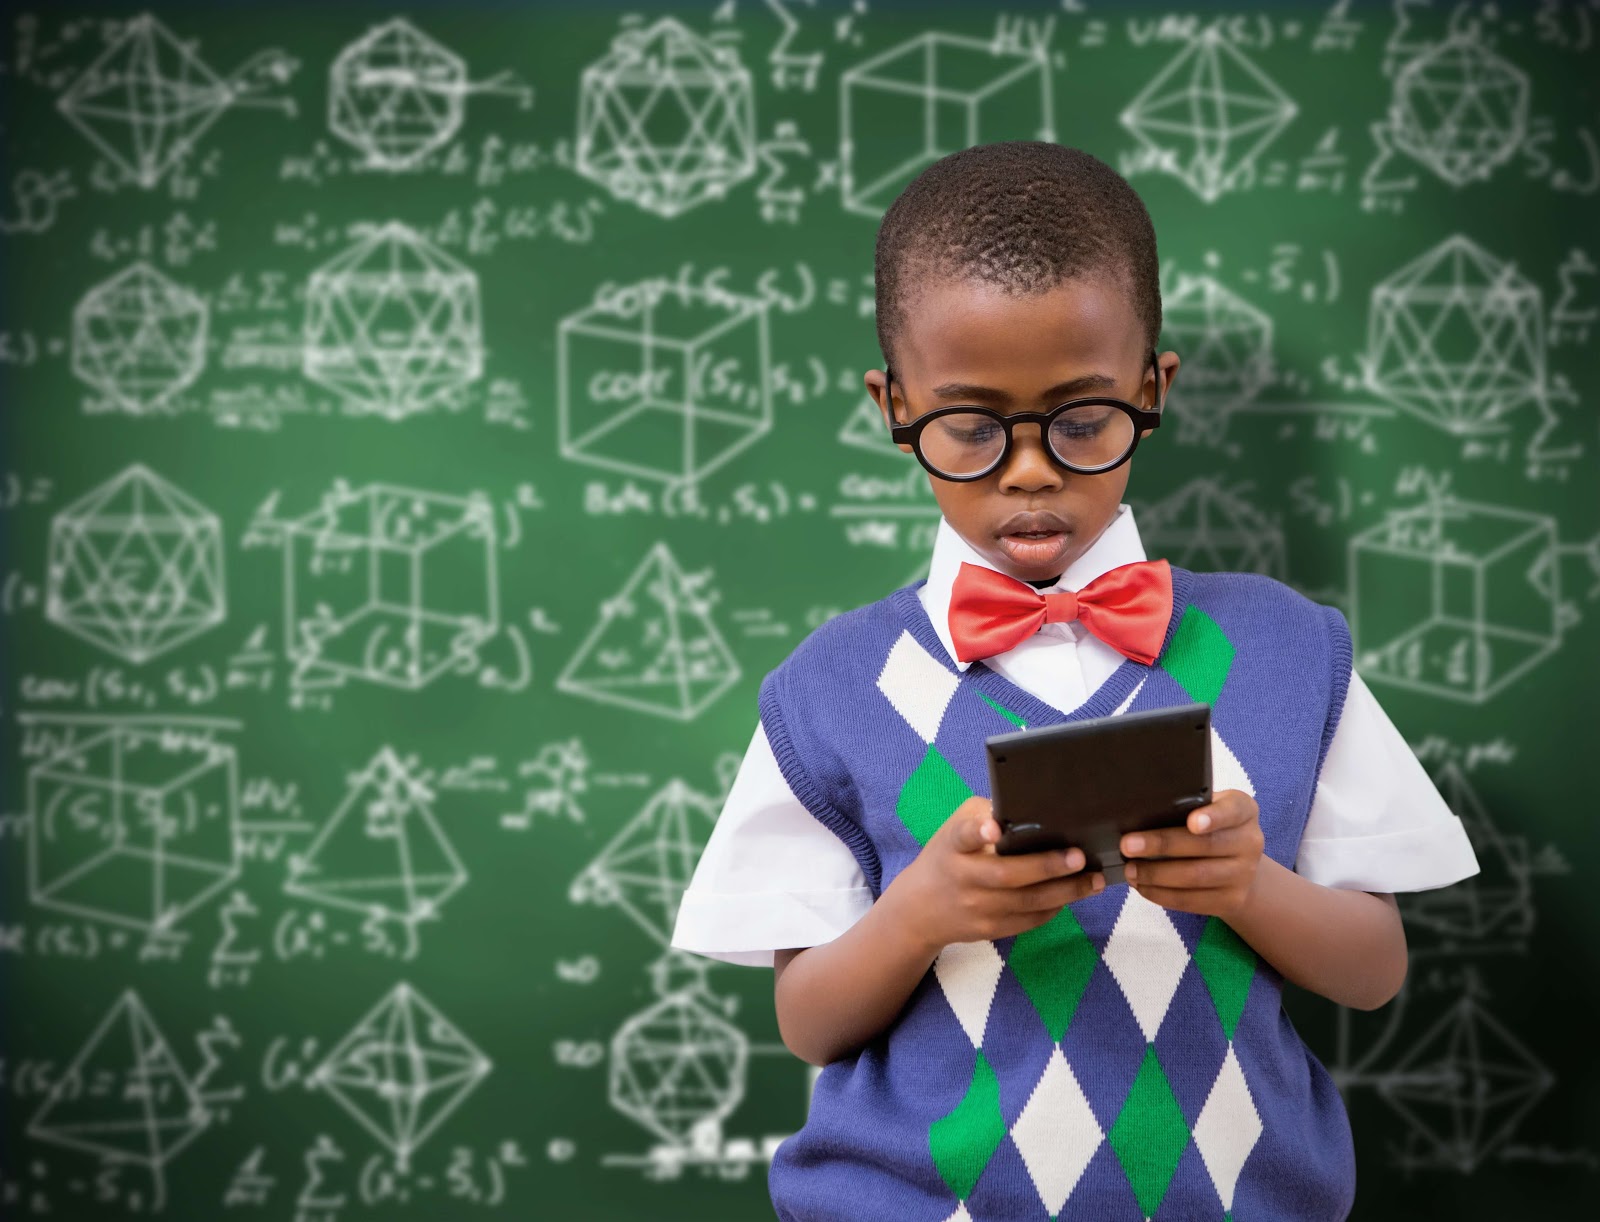 A kid holding a calculator in front of a blackboard